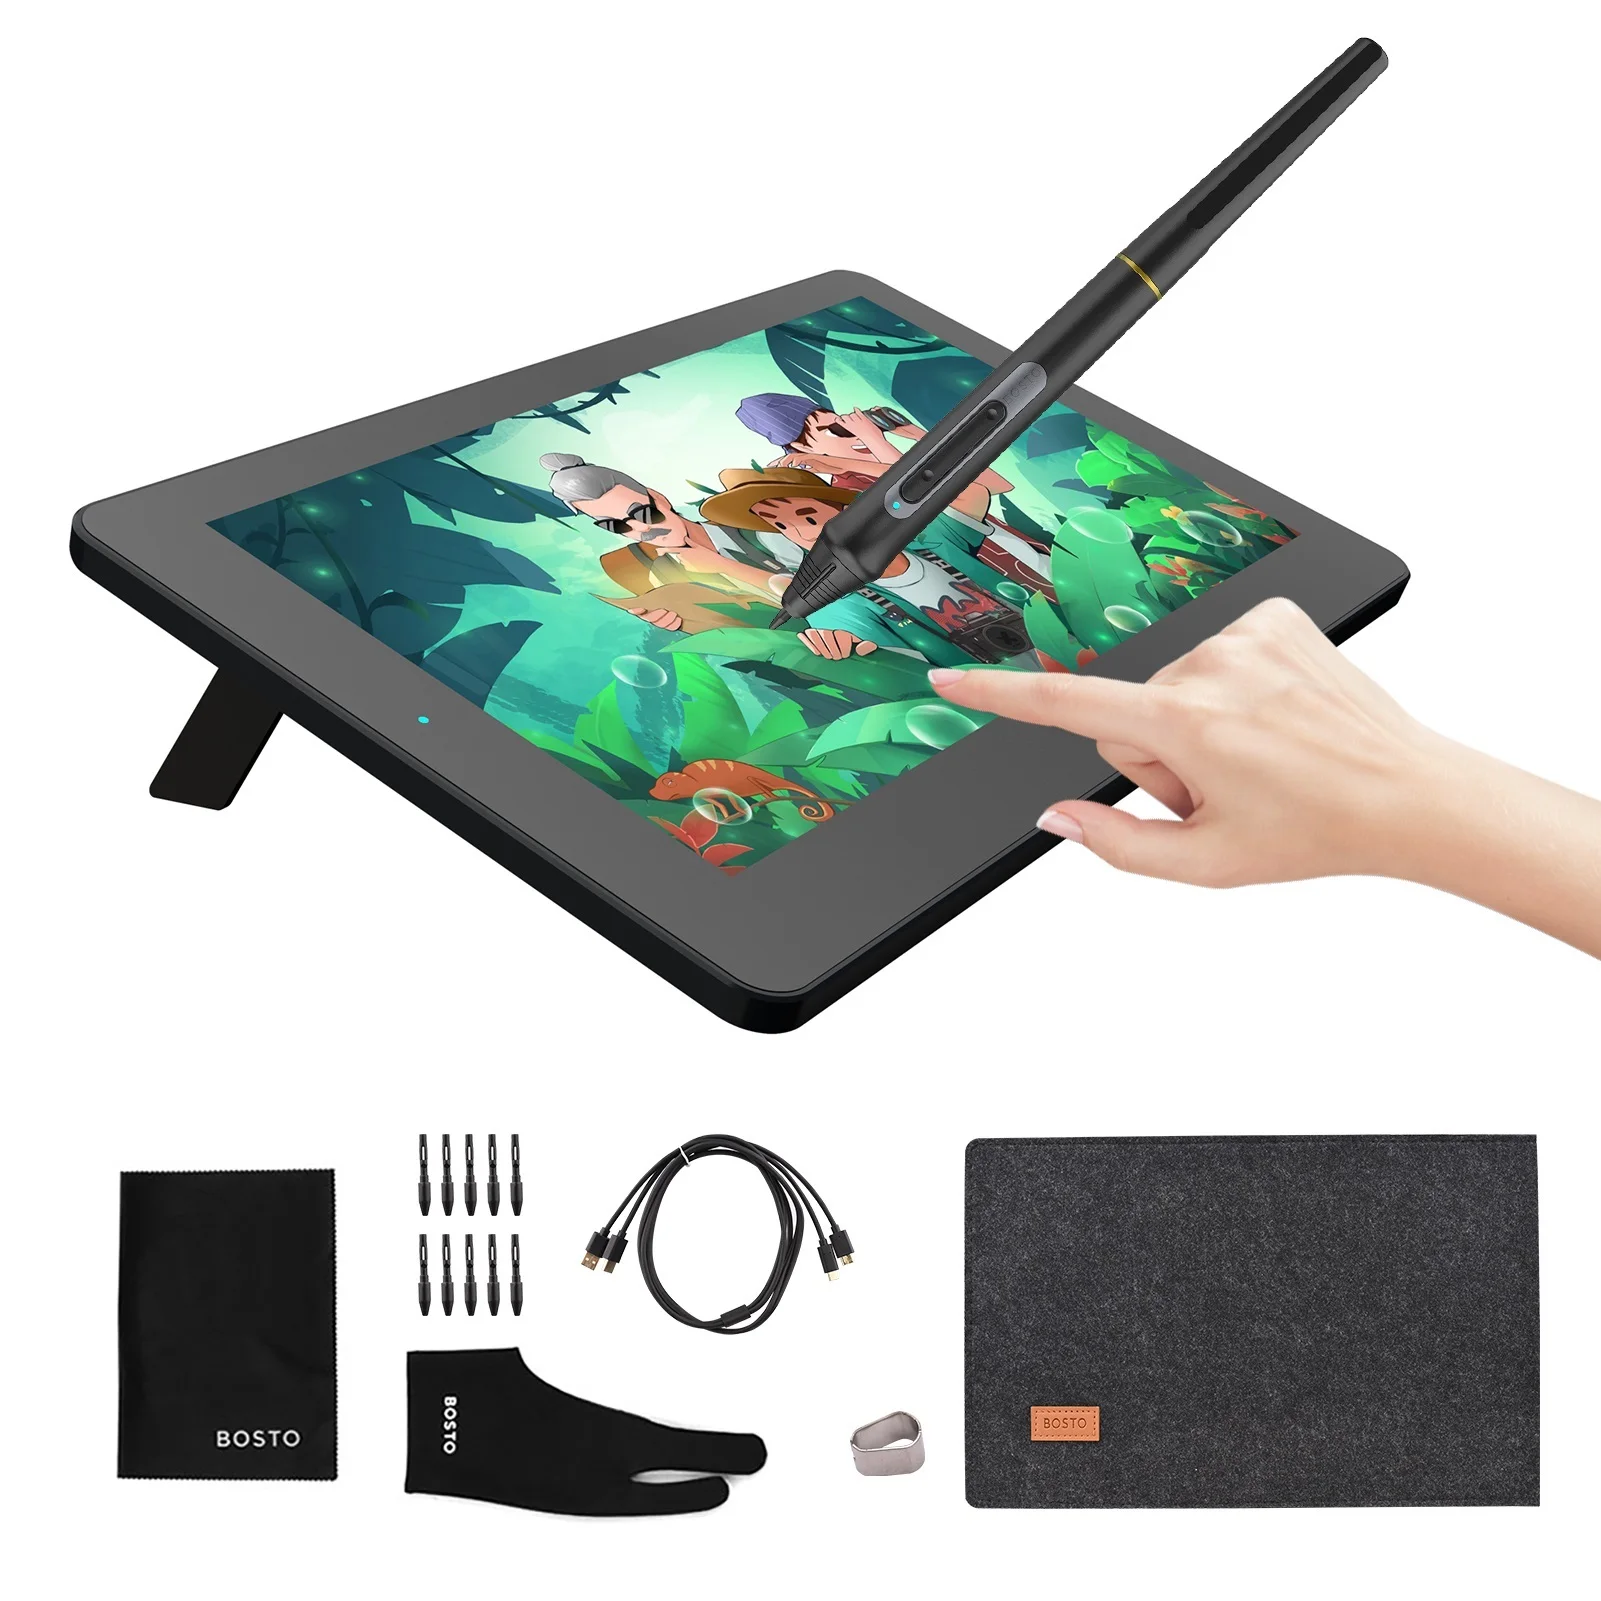 

New 11.6 Inch Graphics Drawing Tablet BT-12HD/BT-12HDT Digital Drawing Tablet HD HIPS LCD 1366*768 Display 8192 Pressure Level